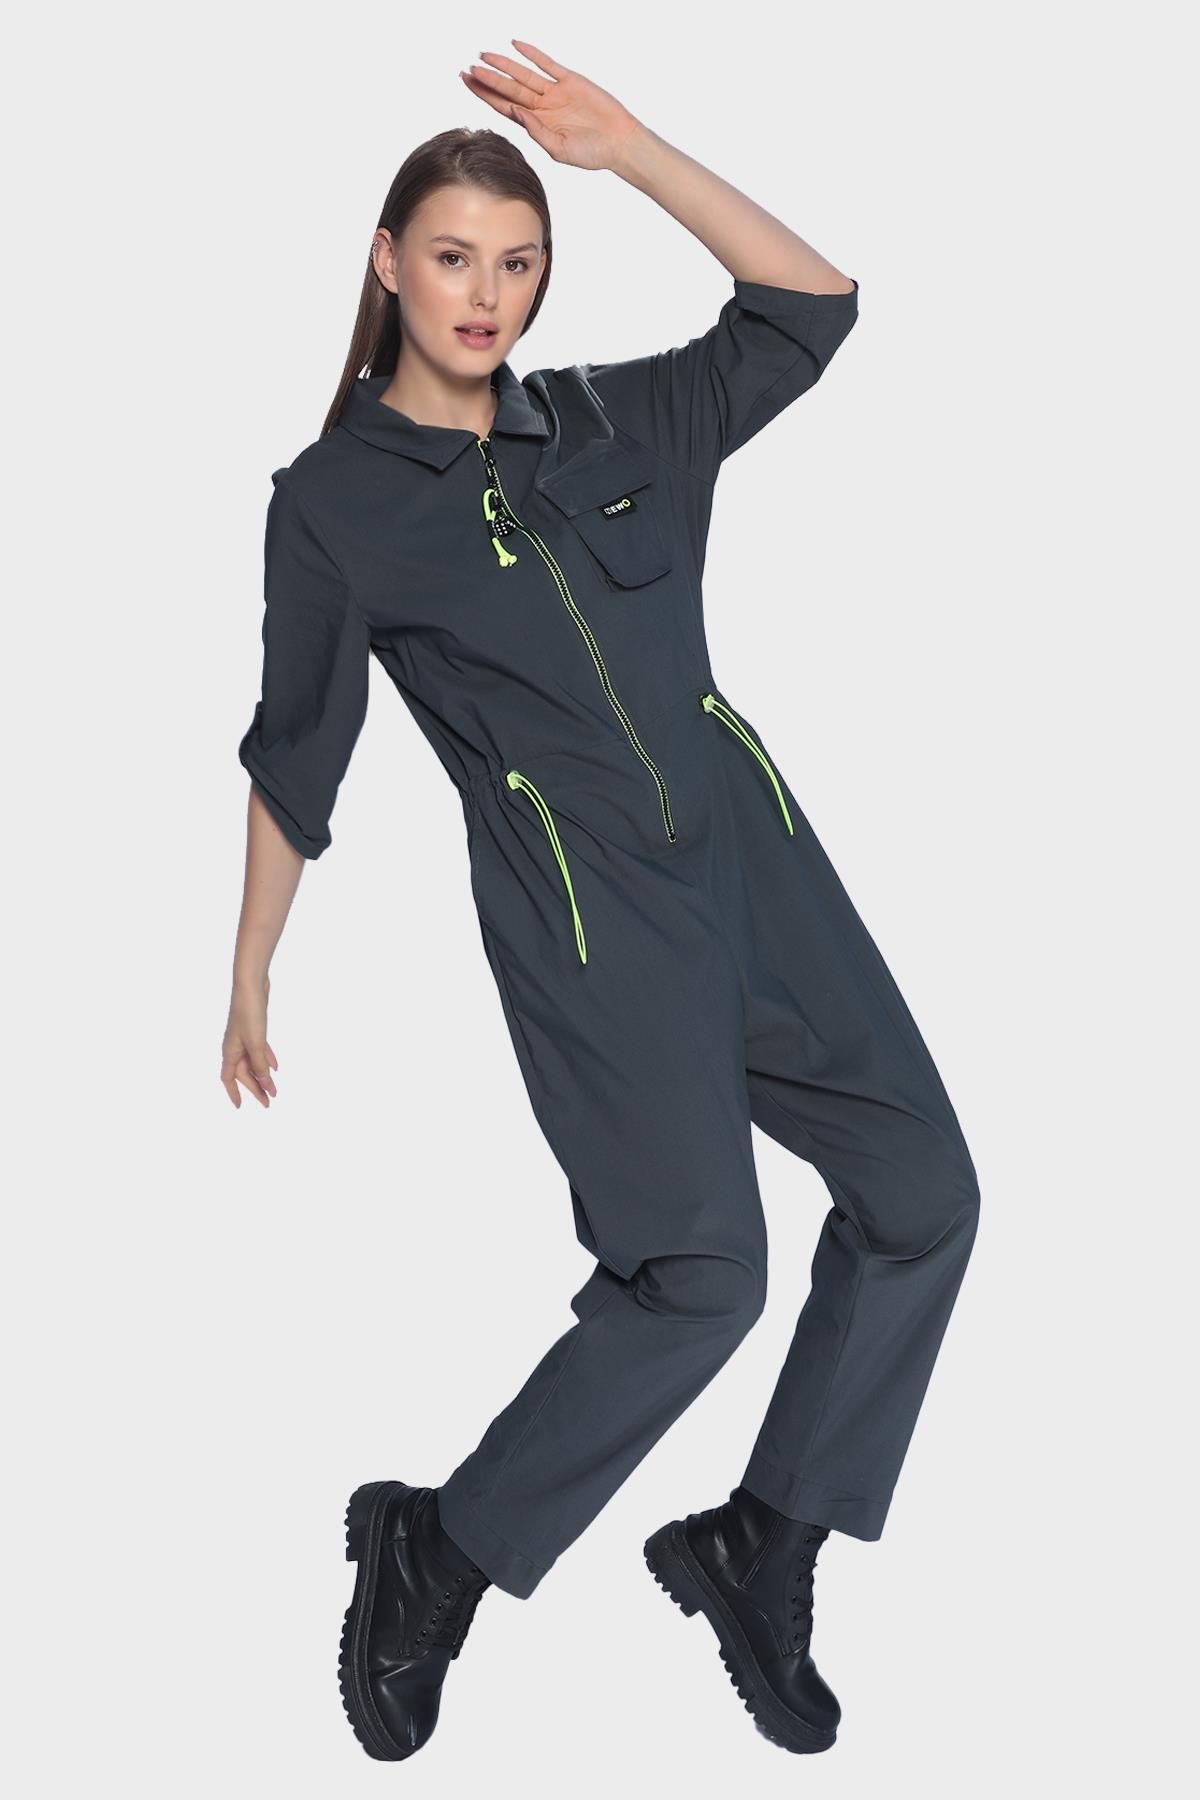 Plus Size Womens Sports Style Jumpsuit with Zipper at the Front - Grey